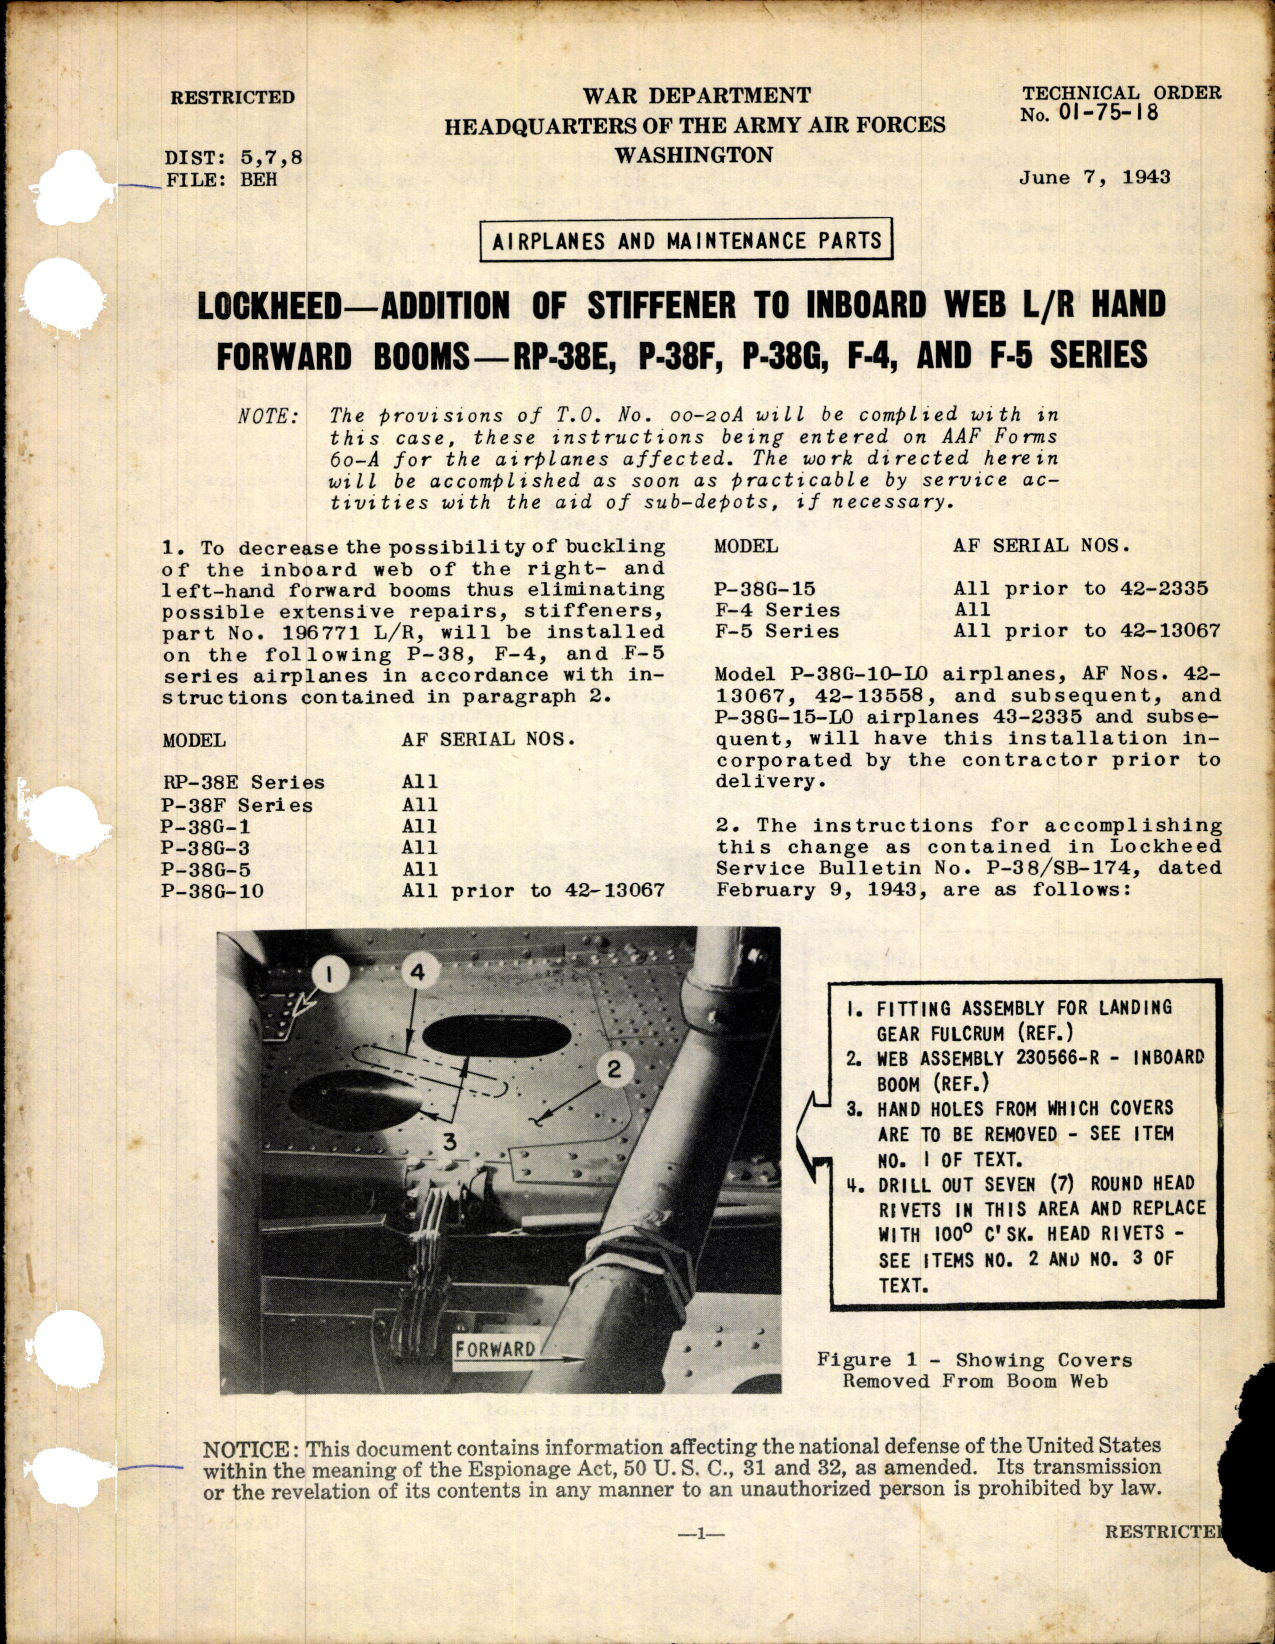 Sample page 1 from AirCorps Library document: Addition of Stiffener to Inboard Web L-R Hand Forward Booms for Rp-38E, F, G, F-4, and F-5 Series